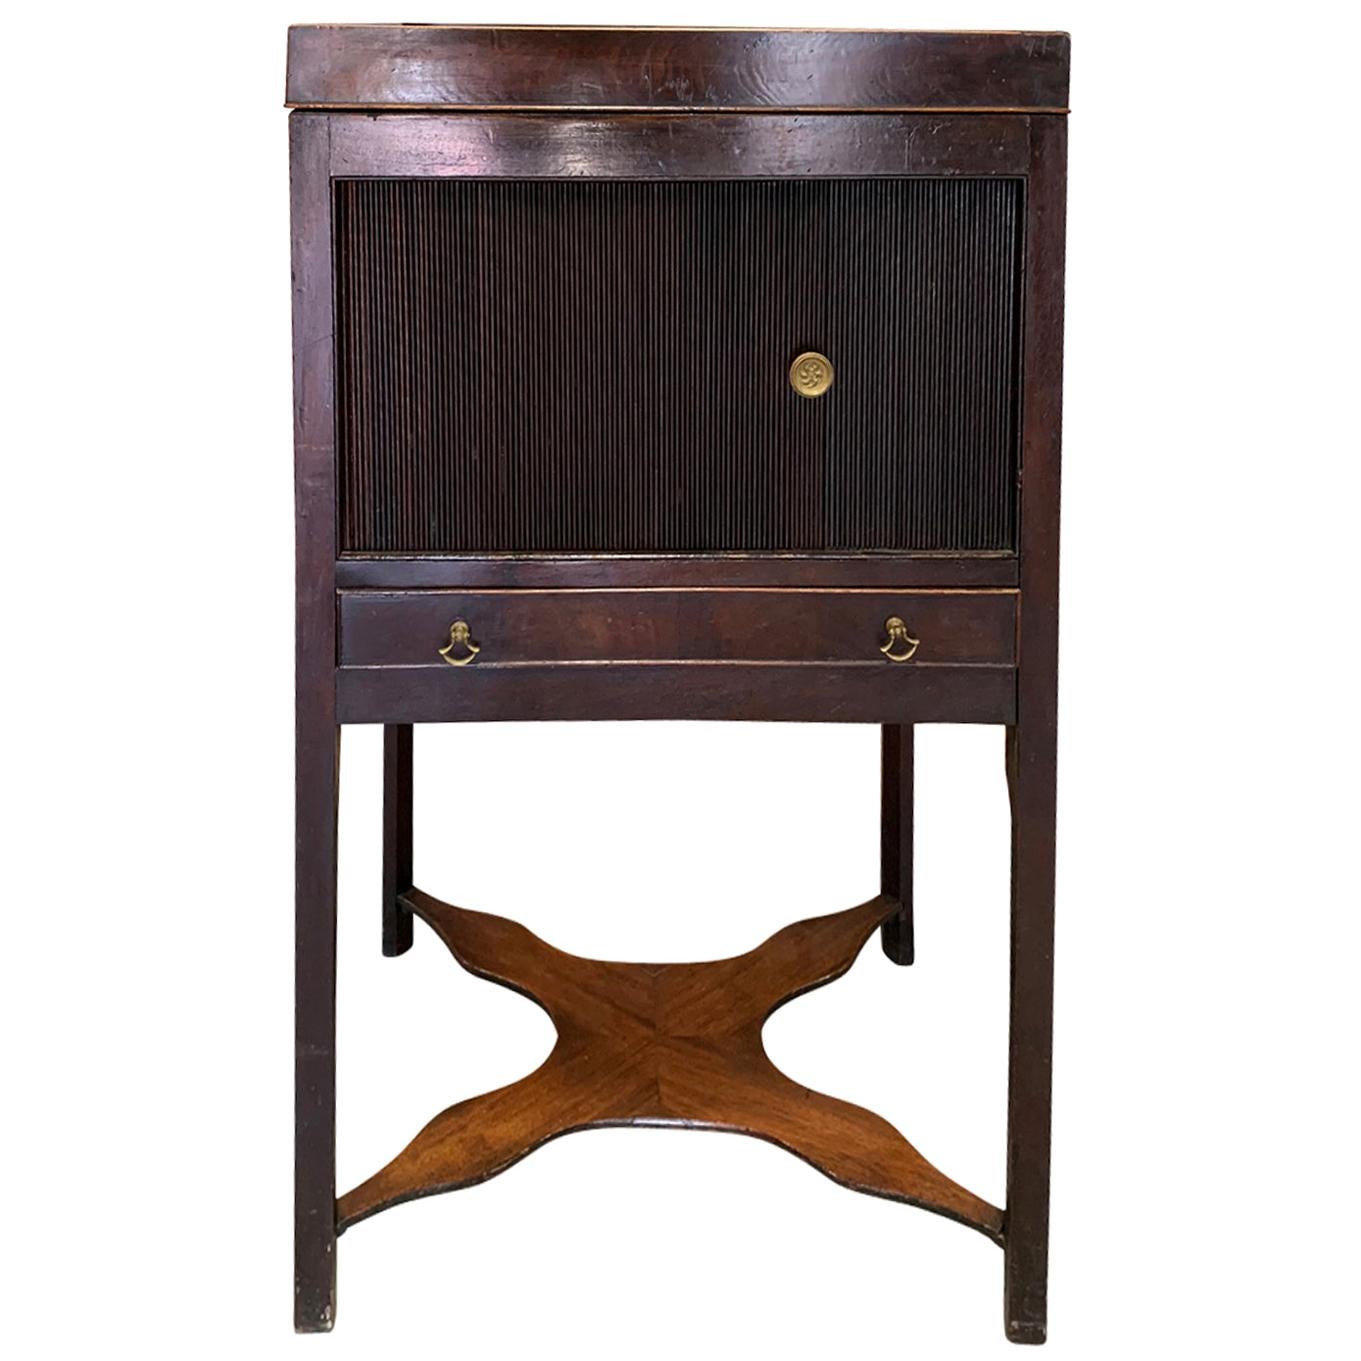 18th-19th Century English Flamed Mahogany & Parquetry Tambour Door Bedside Table